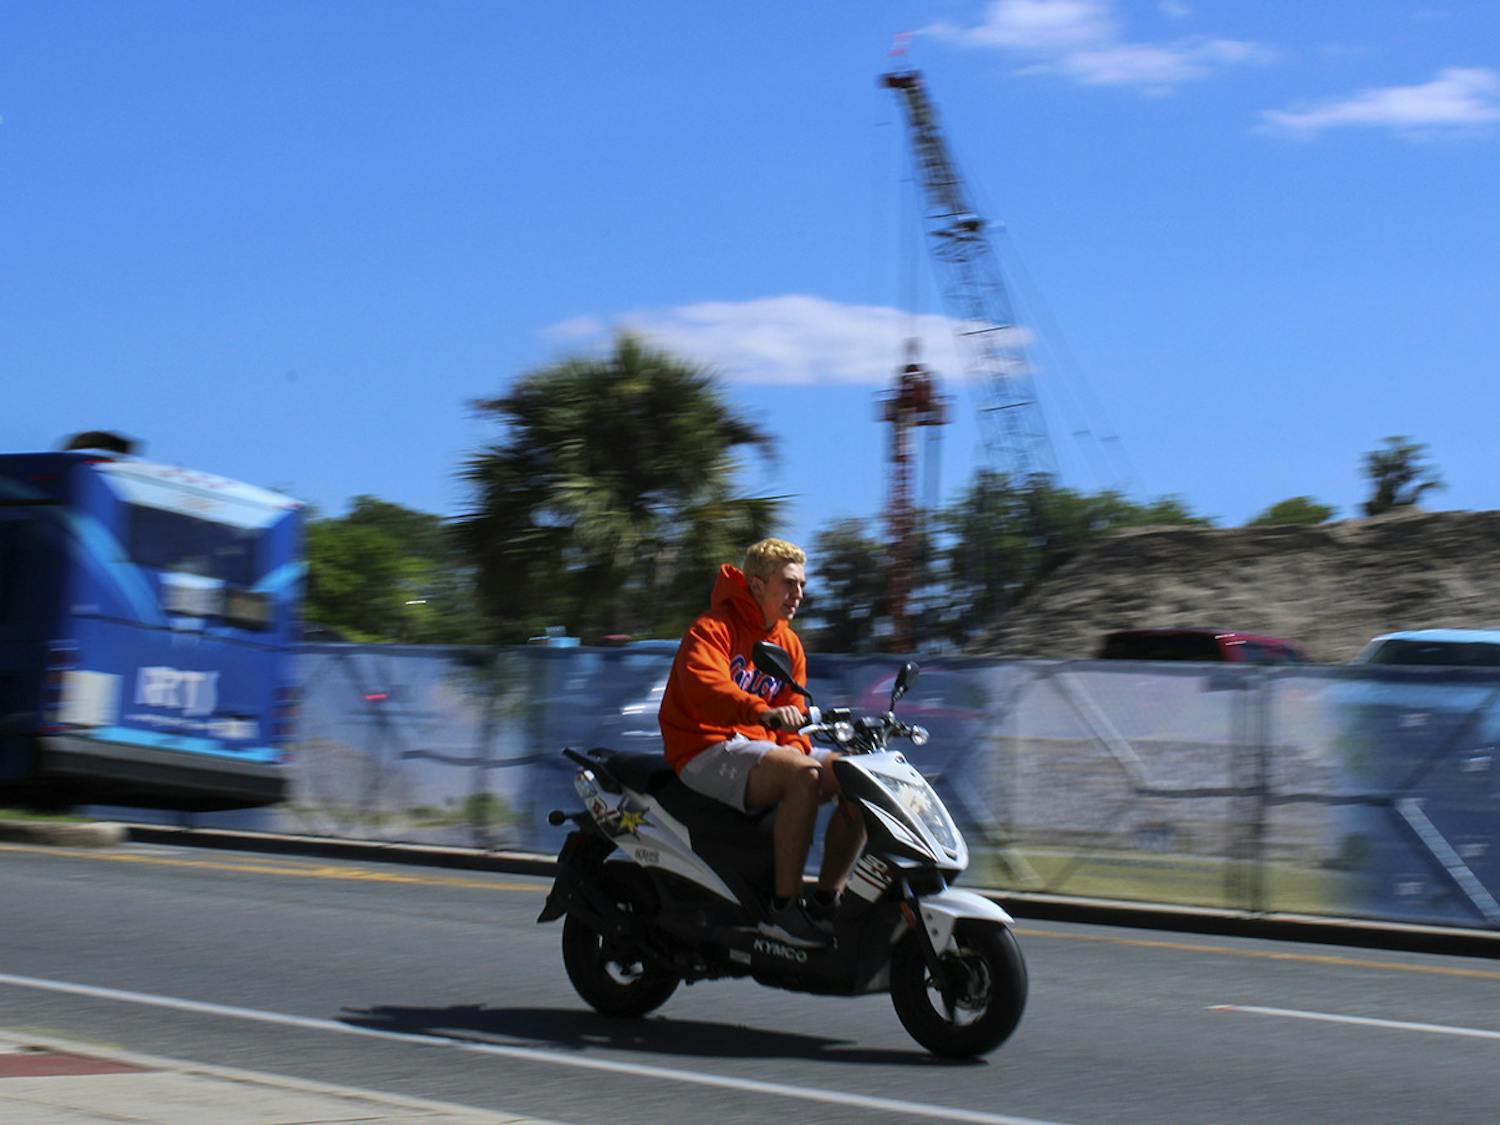 A person wearing a UF sweatshirt rides past a construction site on Museum Road across from the Reitz Union on Friday, March 19, 2021. (Photo by Chasity Maynard)